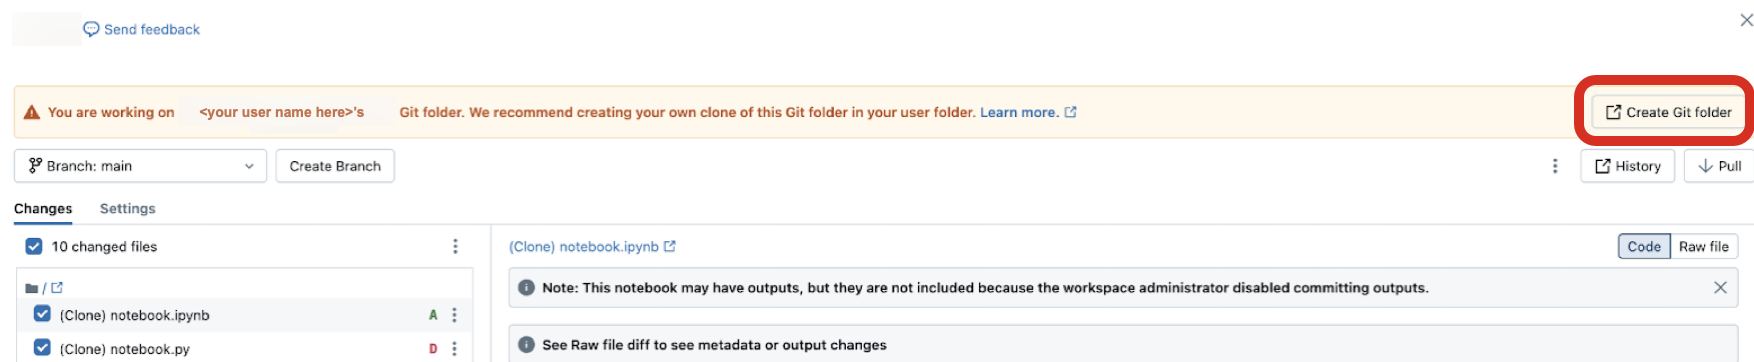 When viewing another user's Git folder, click the **Create Git folder** button in the banner to make a copy of that folder in your own workspace